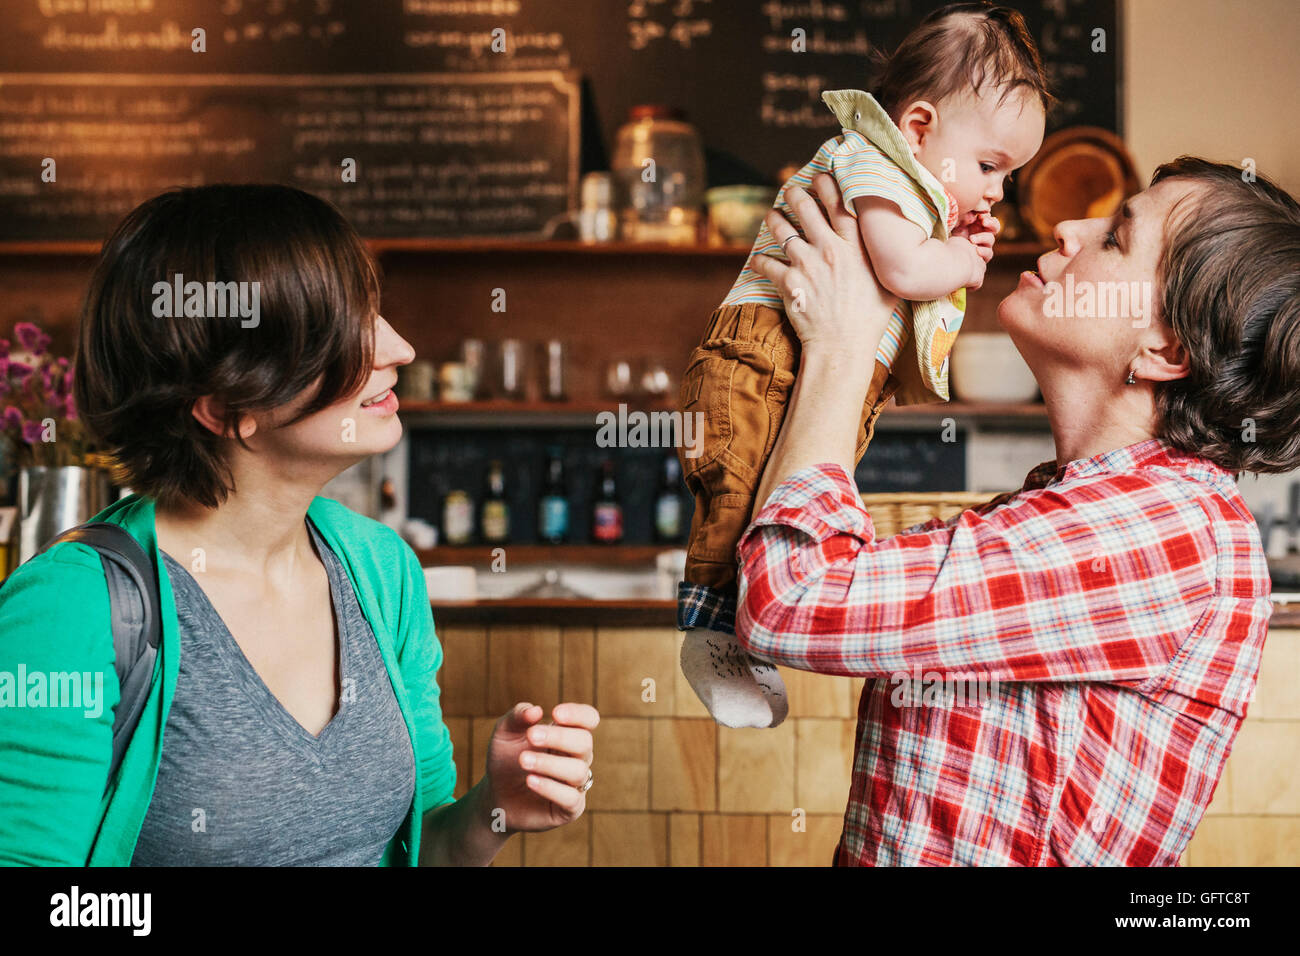 Two women a same sex couple with their 6 month old baby in their coffee shop business owners and parents Stock Photo image